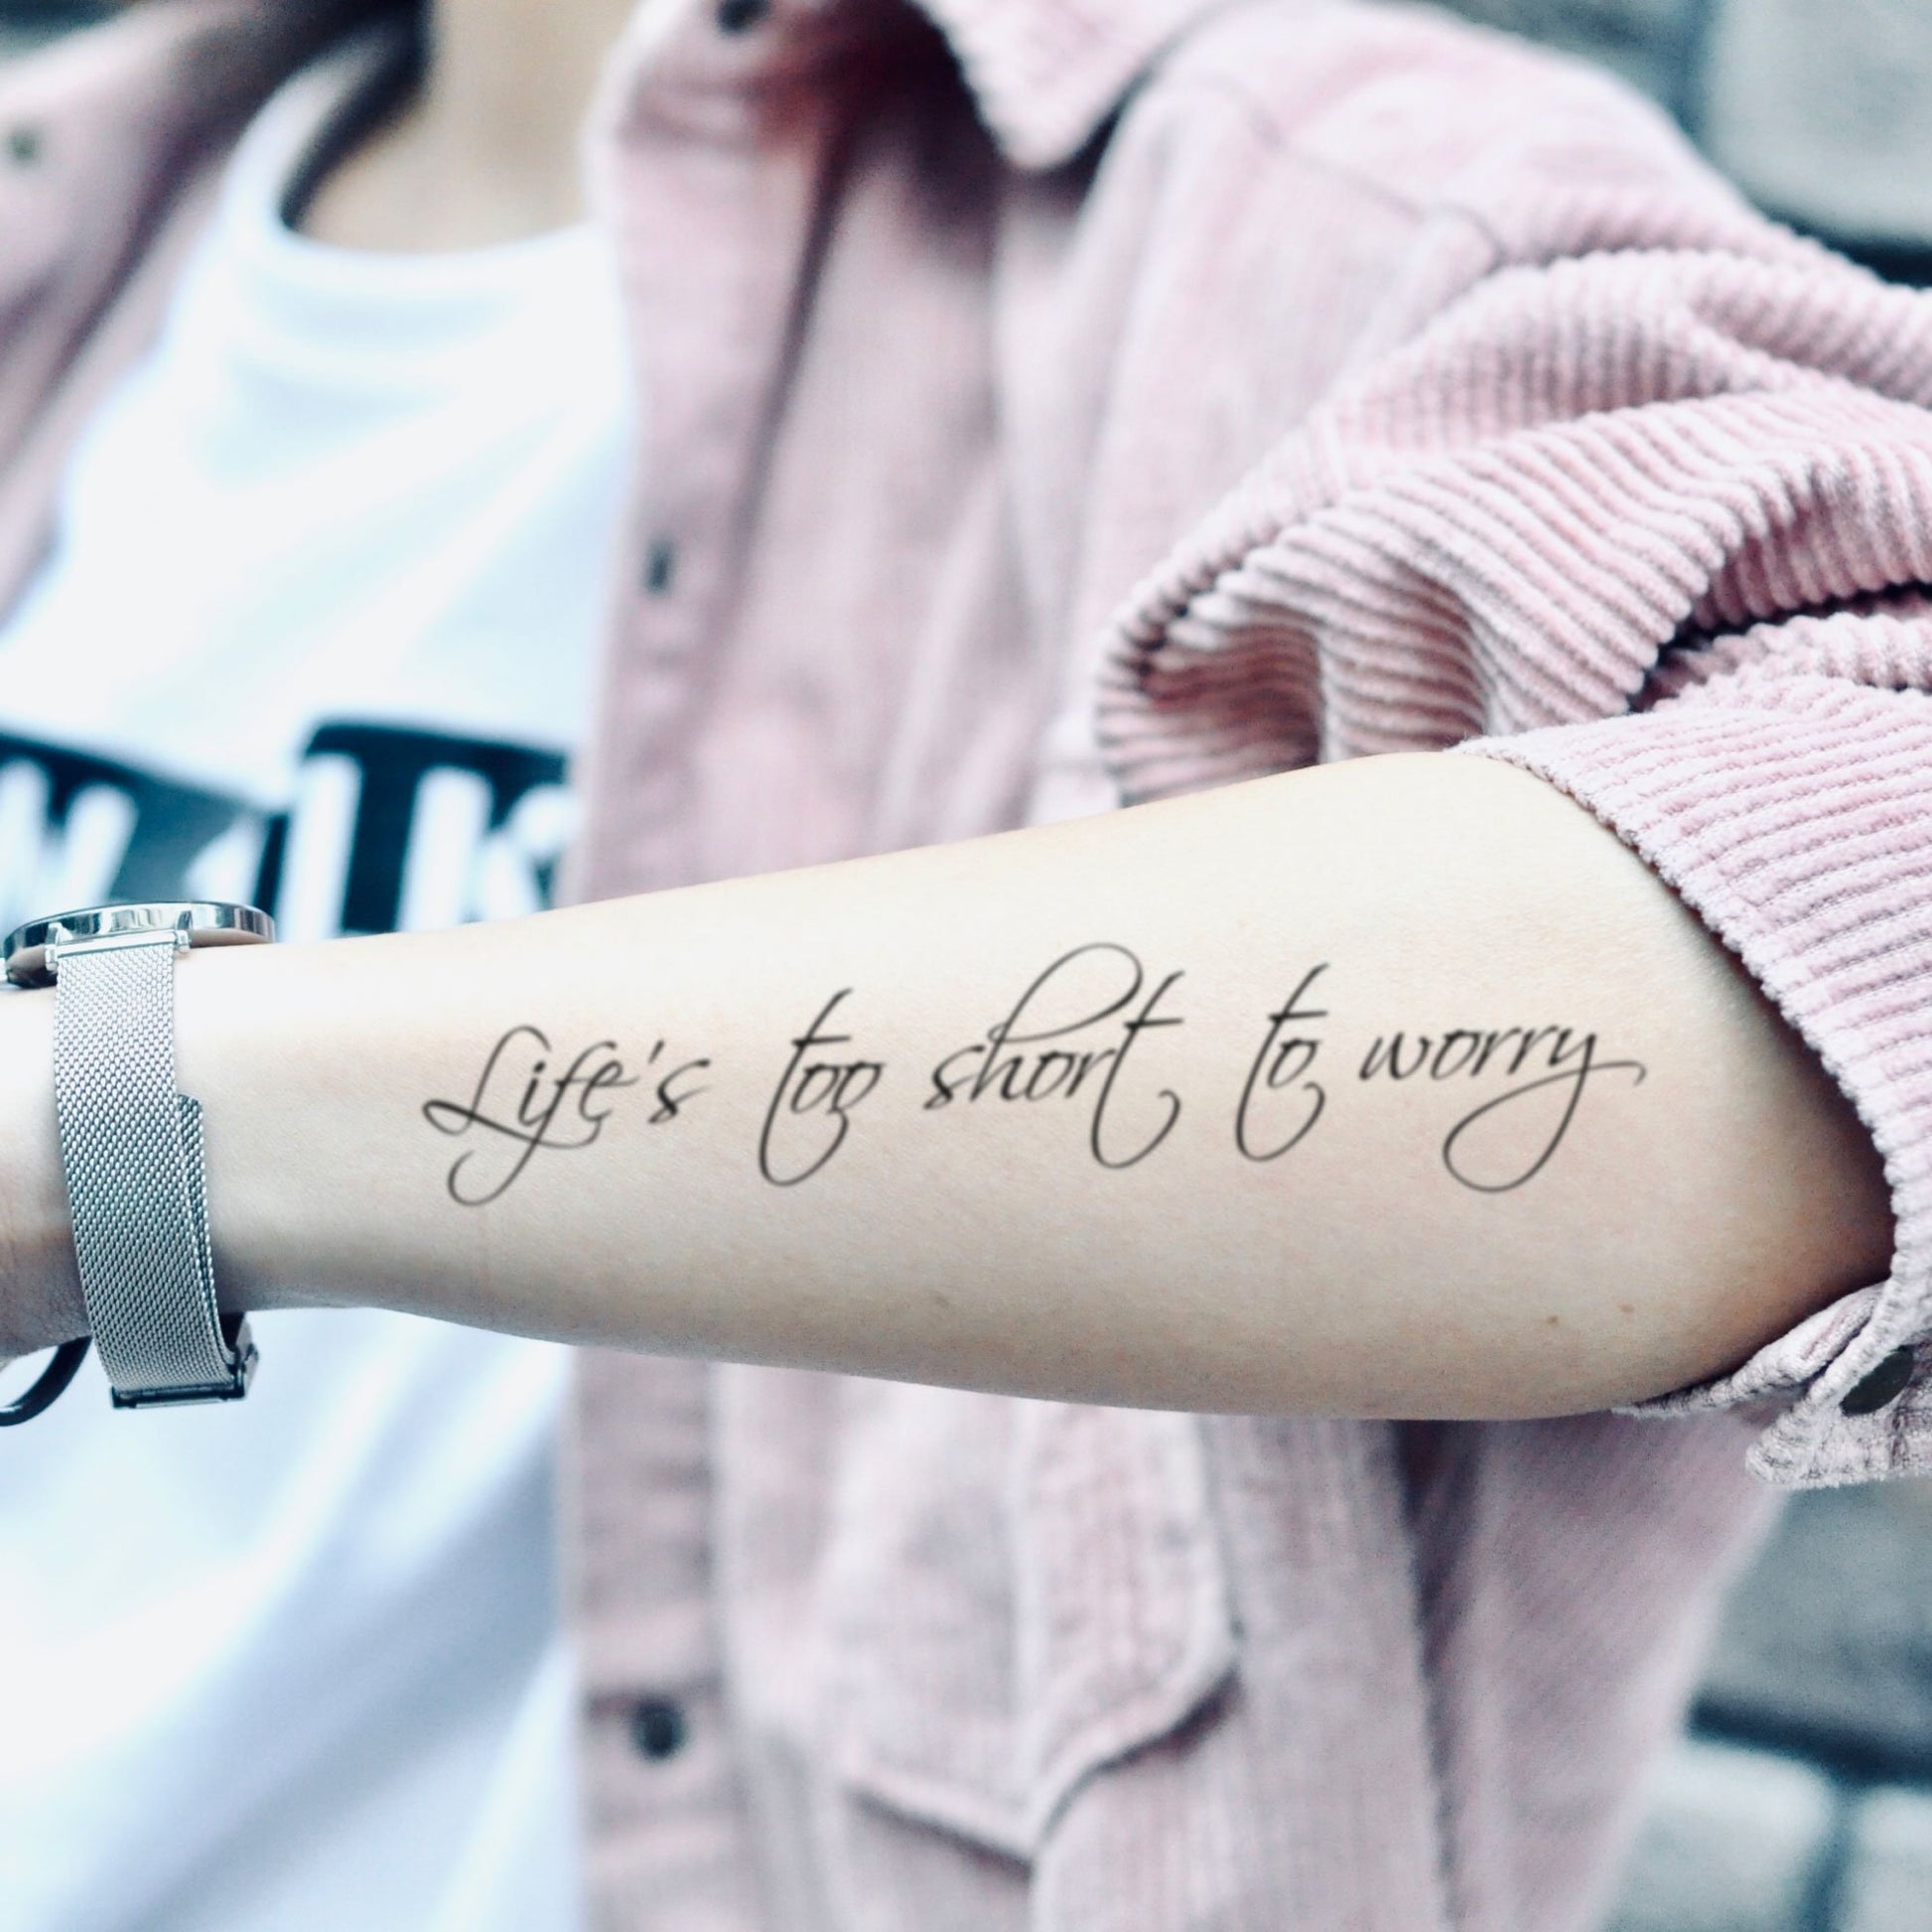 fake medium life's too short to worry lower arm lettering temporary tattoo sticker design idea on forearm